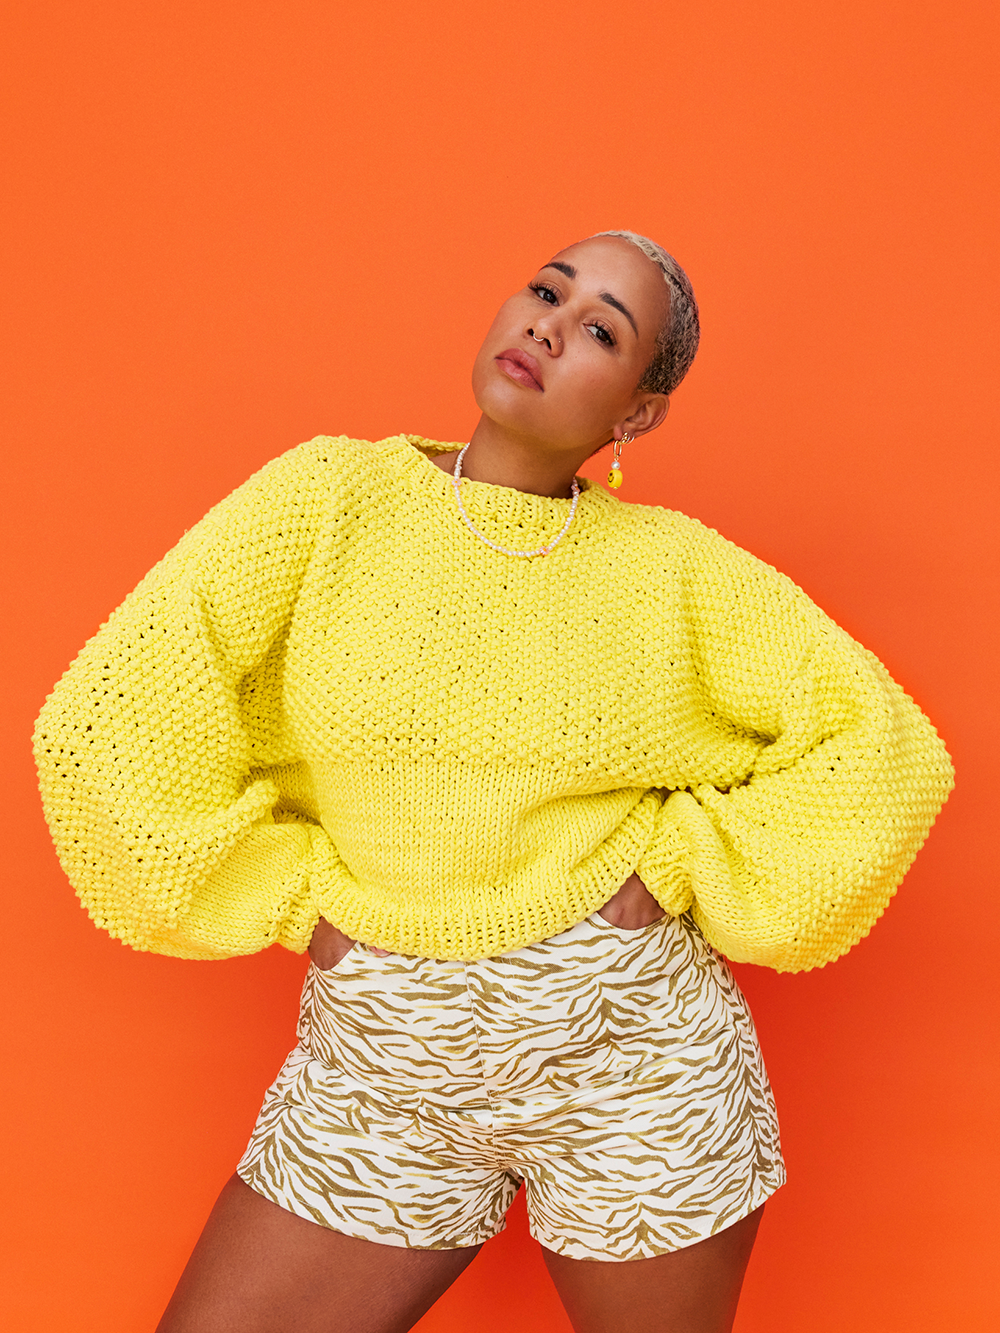 Woman stands in front of orange background, wearing a chunky knitted oversized yellow cotton jumper and patterned denim shorts.